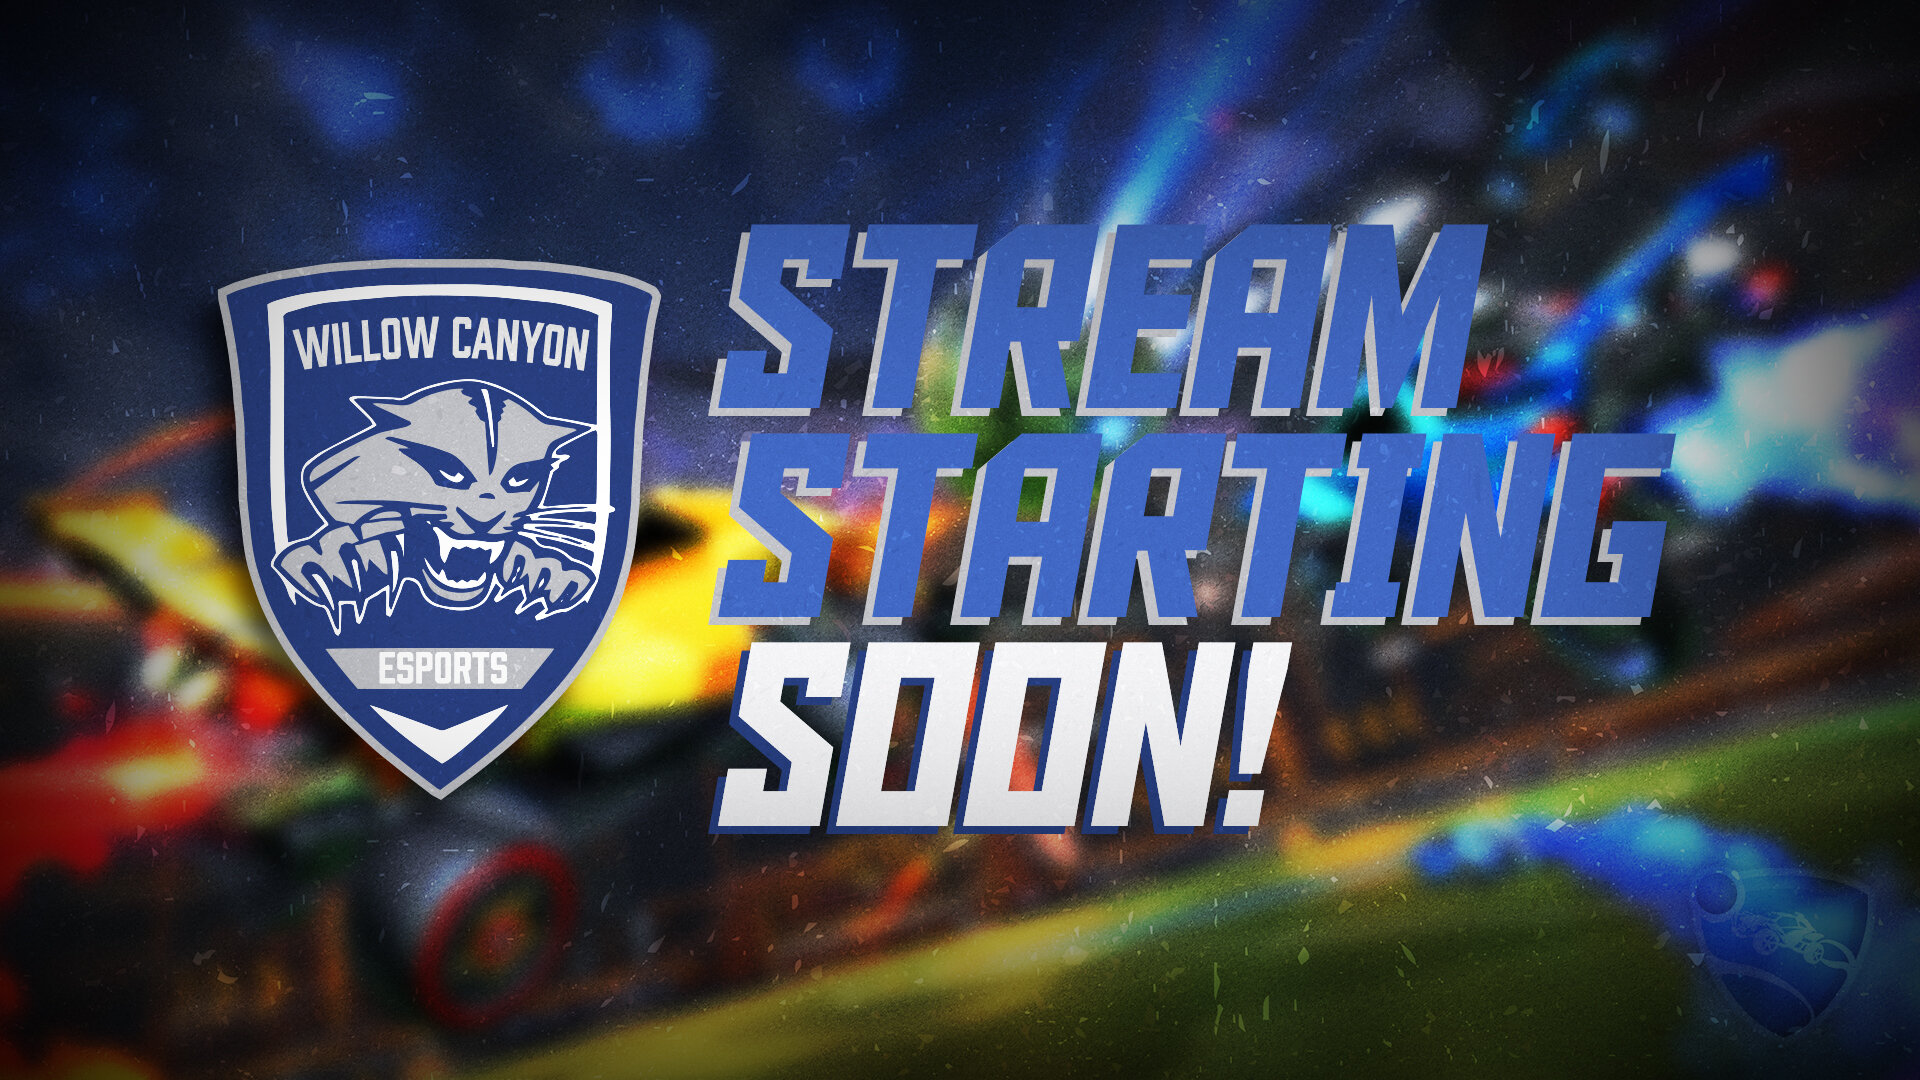 “Starting Soon” stream graphic for Rocket League.